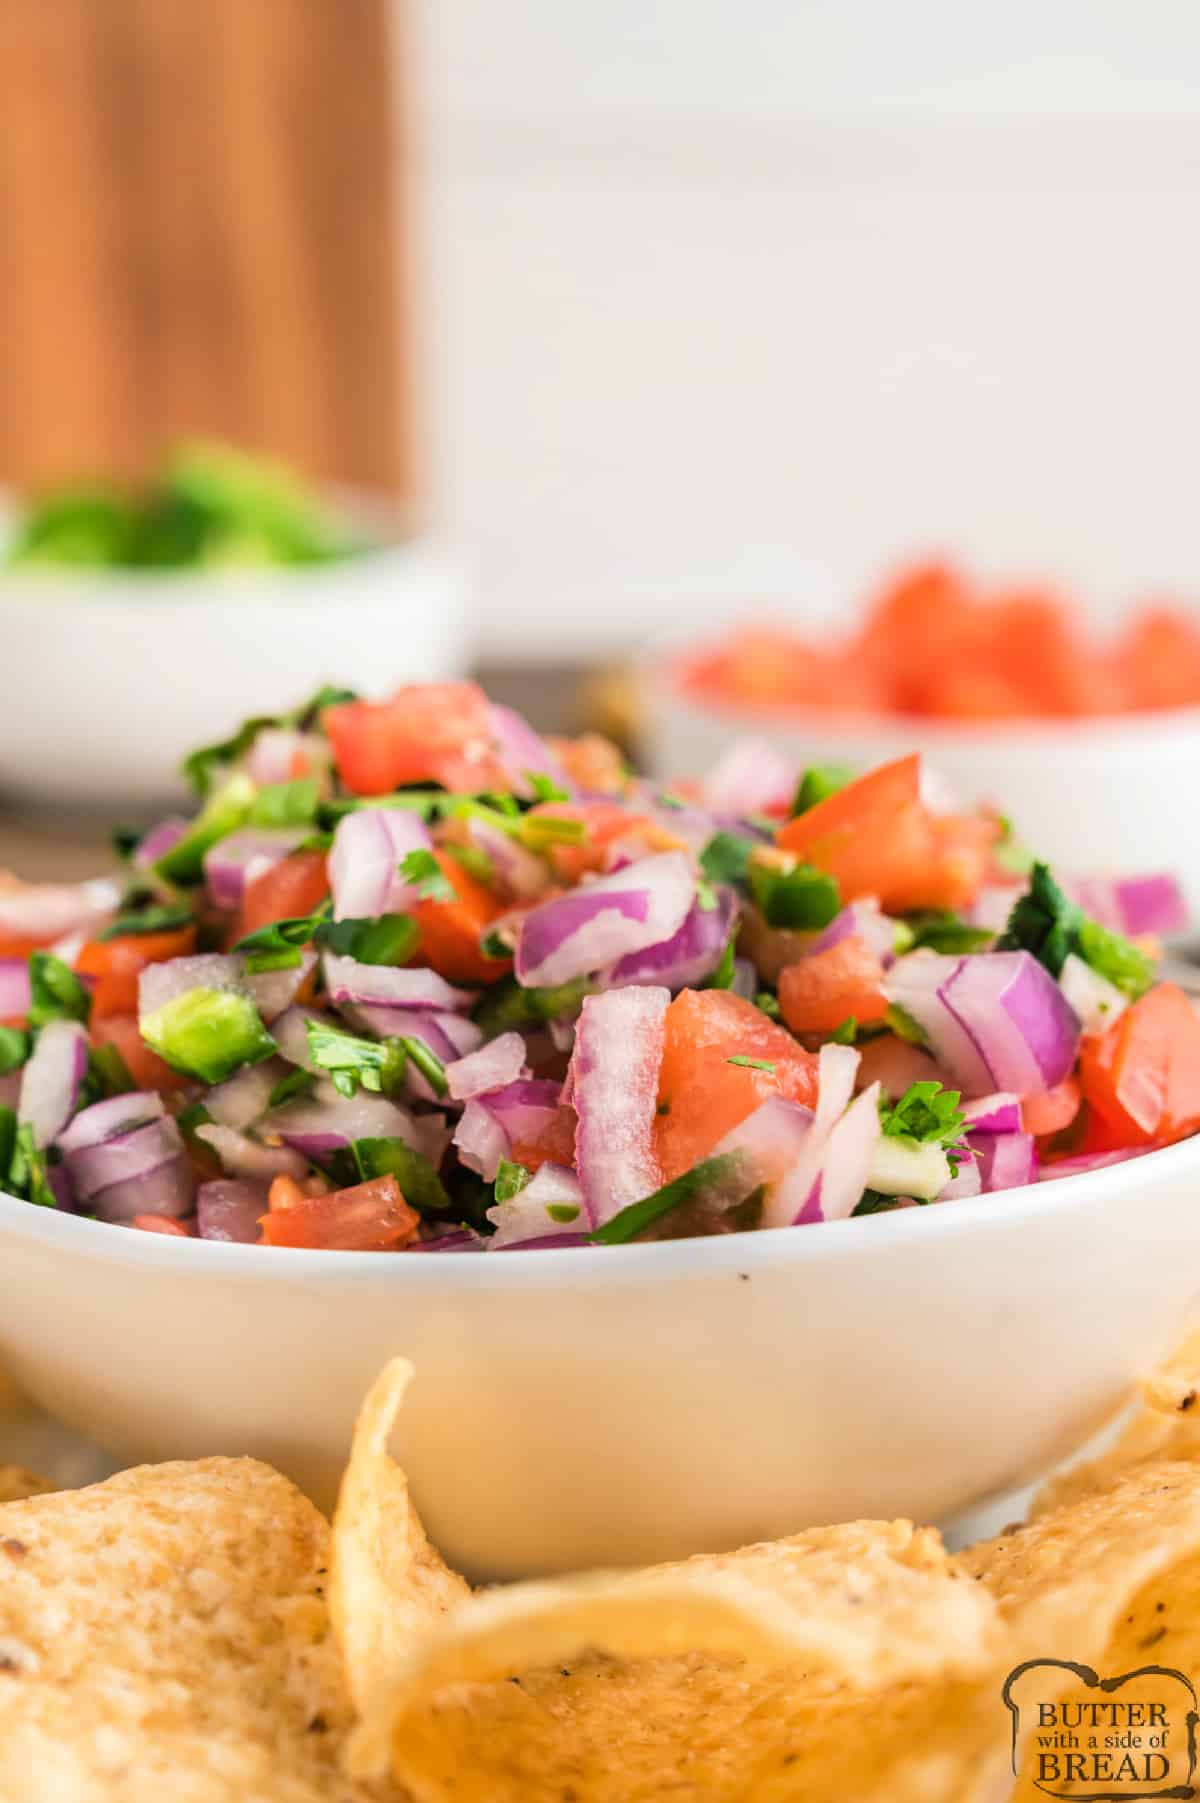 Pico de Gallo is fresh, delicious, and packed with flavor. Homemade pico de gallo is easy to make and pairs perfectly with chips and all of your favorite Mexican dishes.